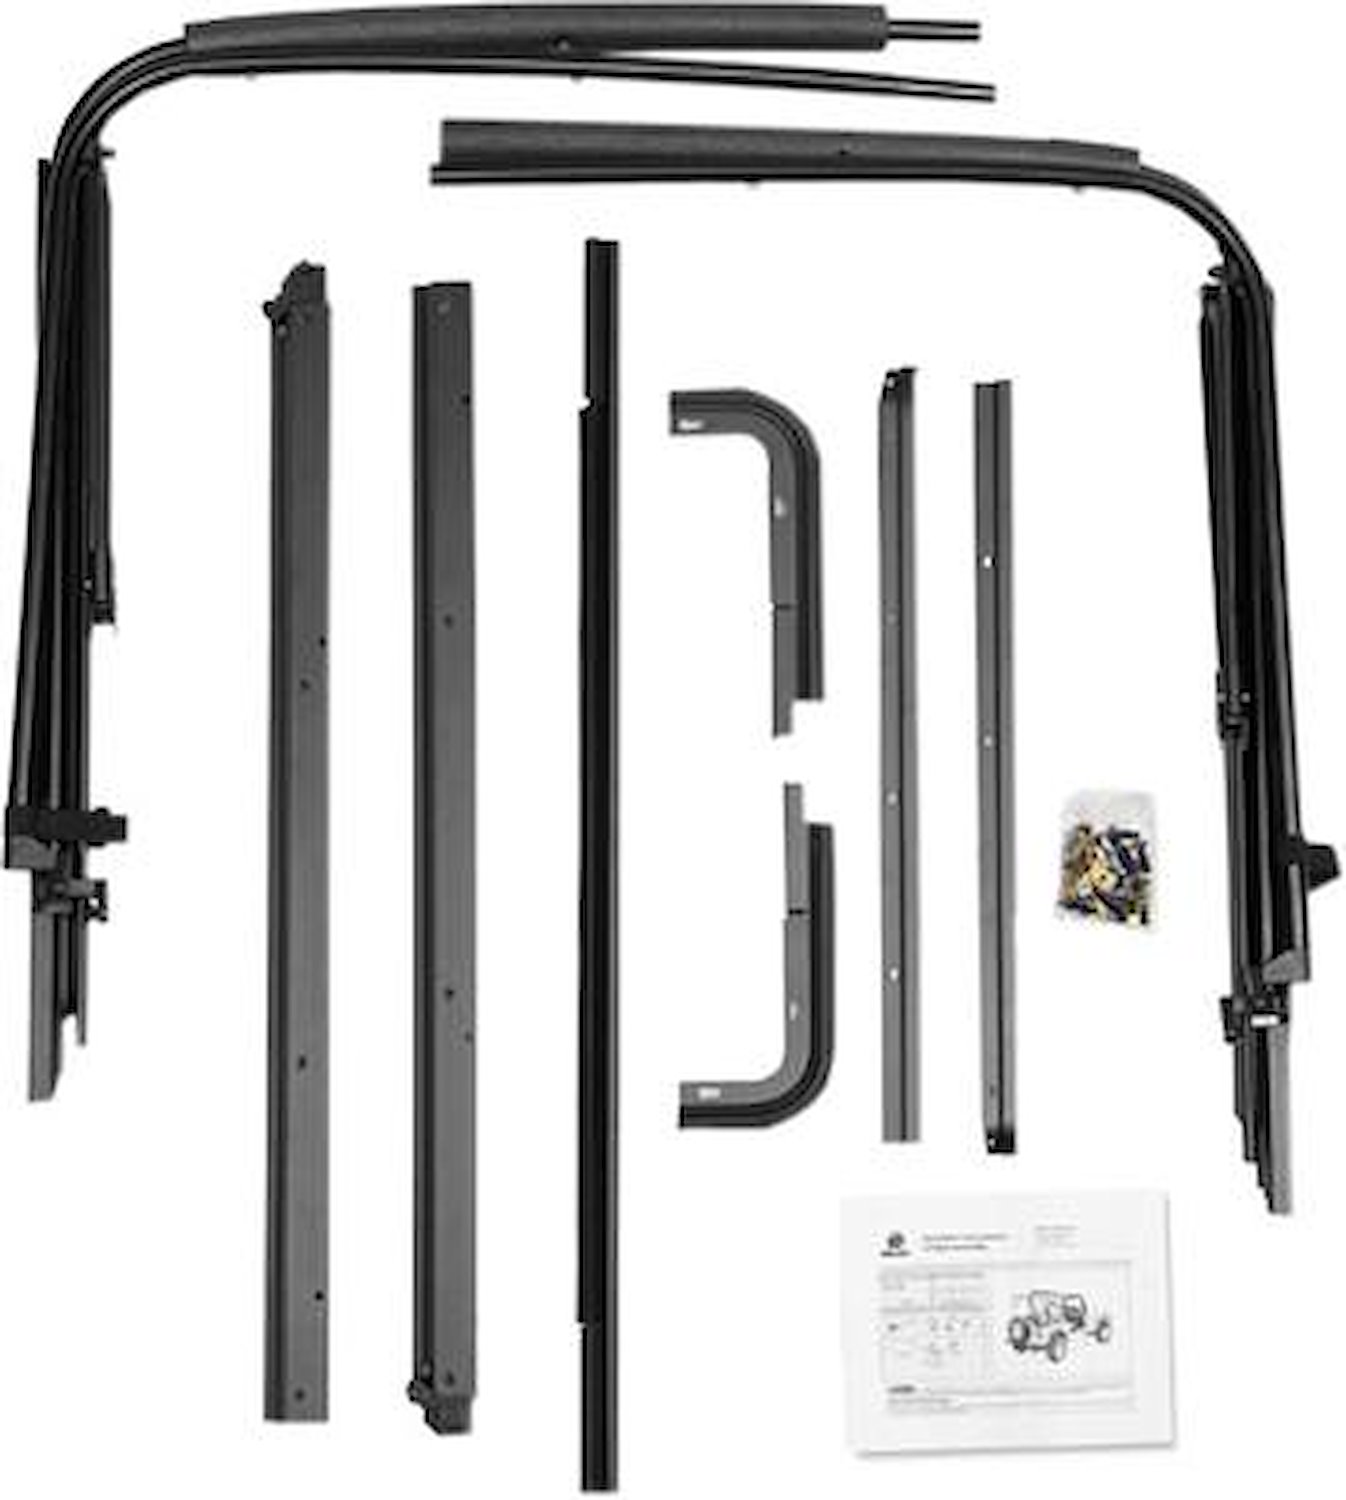 OE Style Replacement Bow & Frame Hardware Kit, Incl. Replacement Hardware/Door Surrounds/Tailgate Bar/Retainer Clips